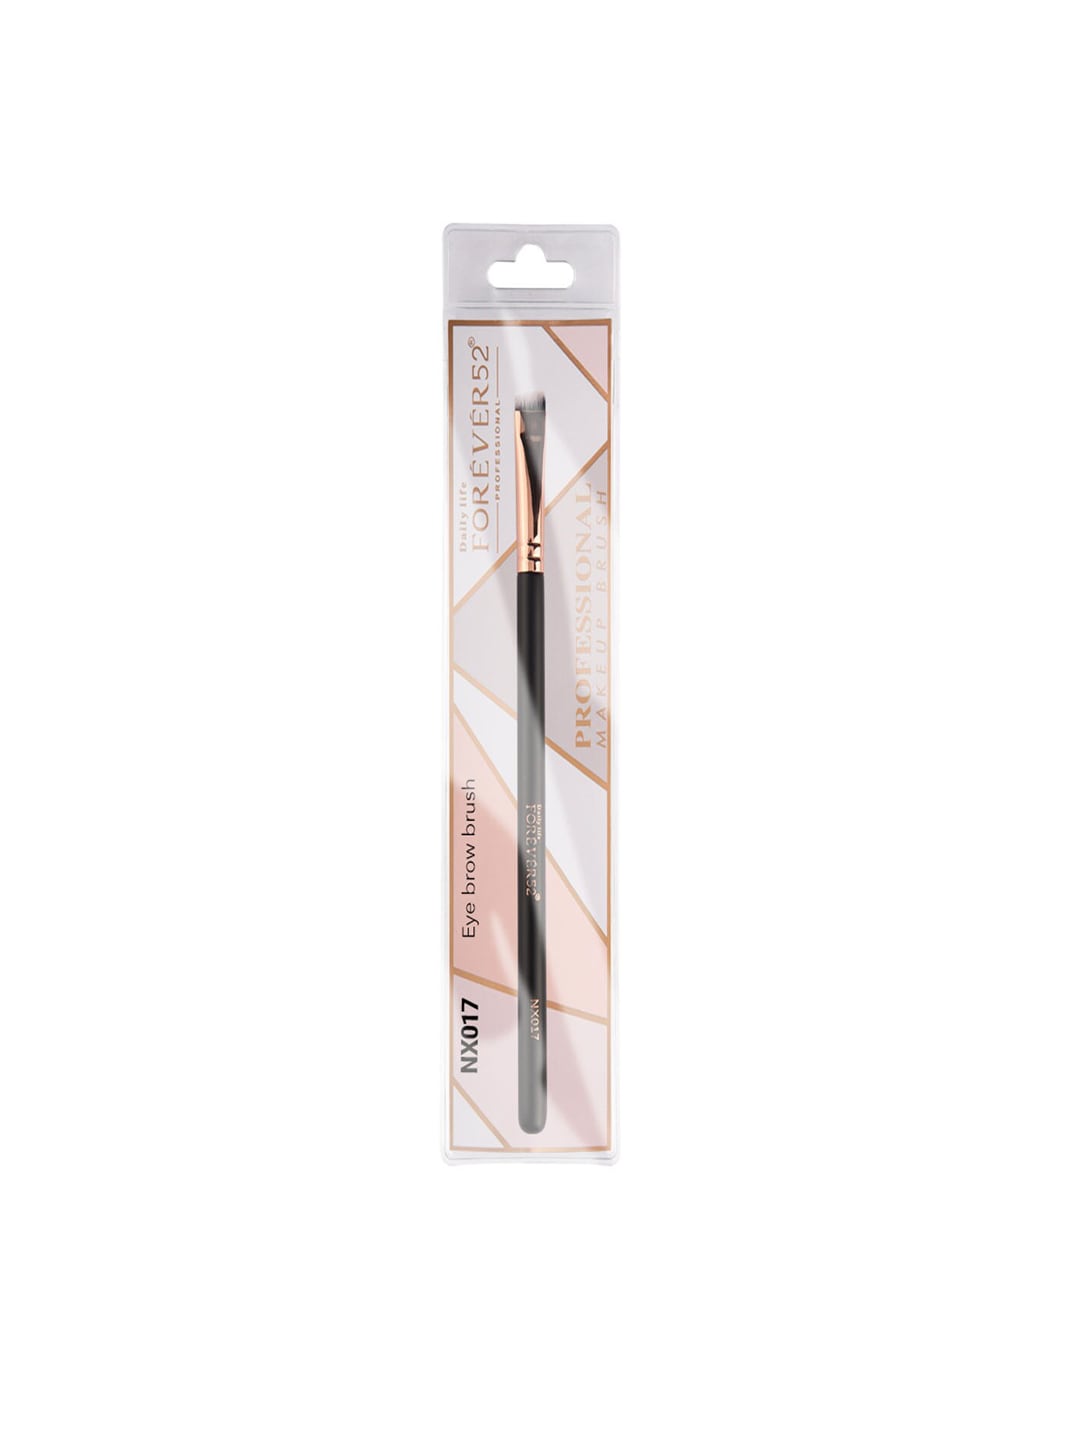 Daily Life Forever52 eye brow brush NX017 Price in India